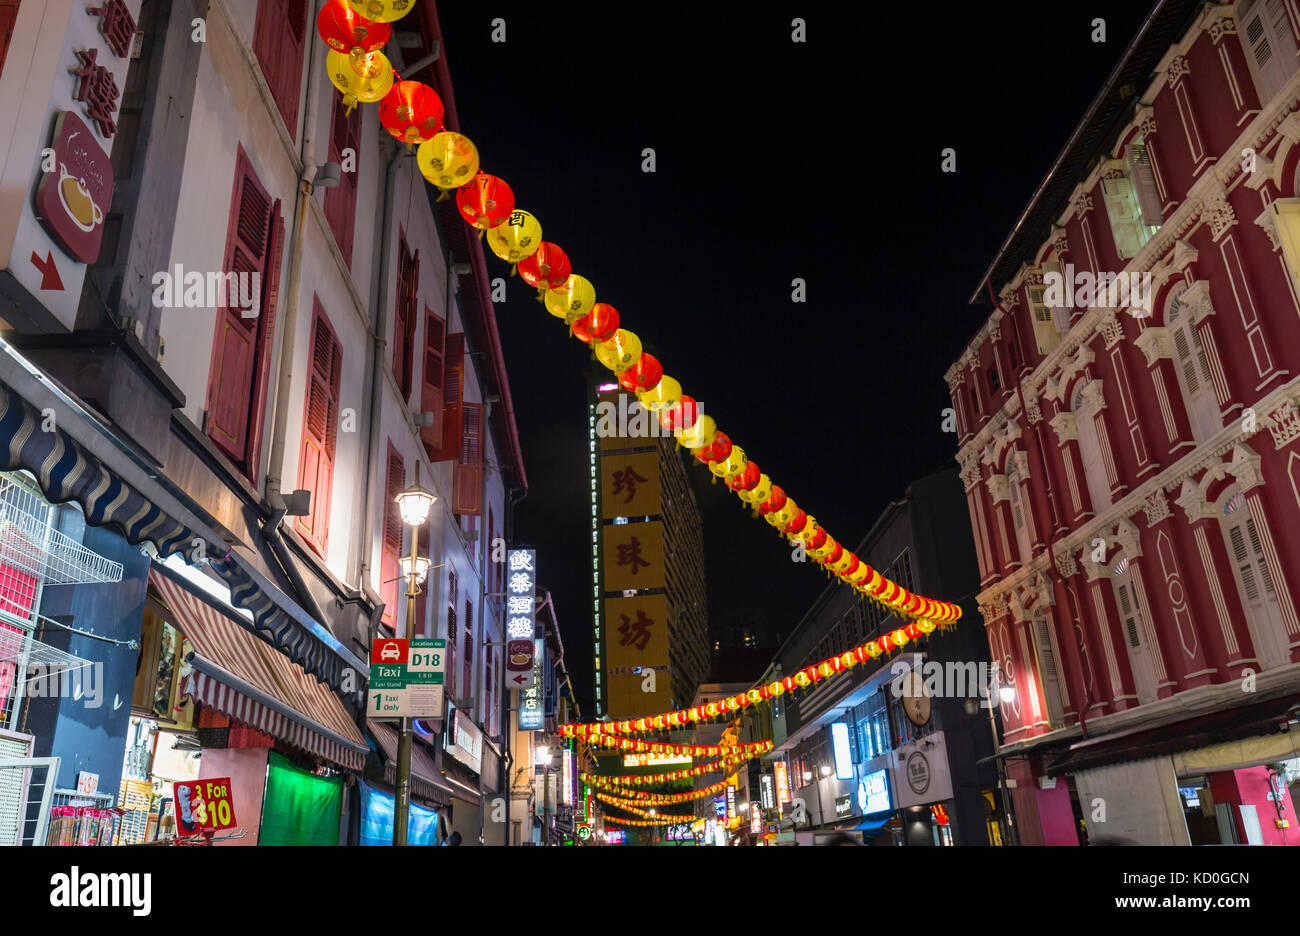 Paper lanterns and shopfronts in chinatown street at night, Singapore, South East Asia Stock Photo